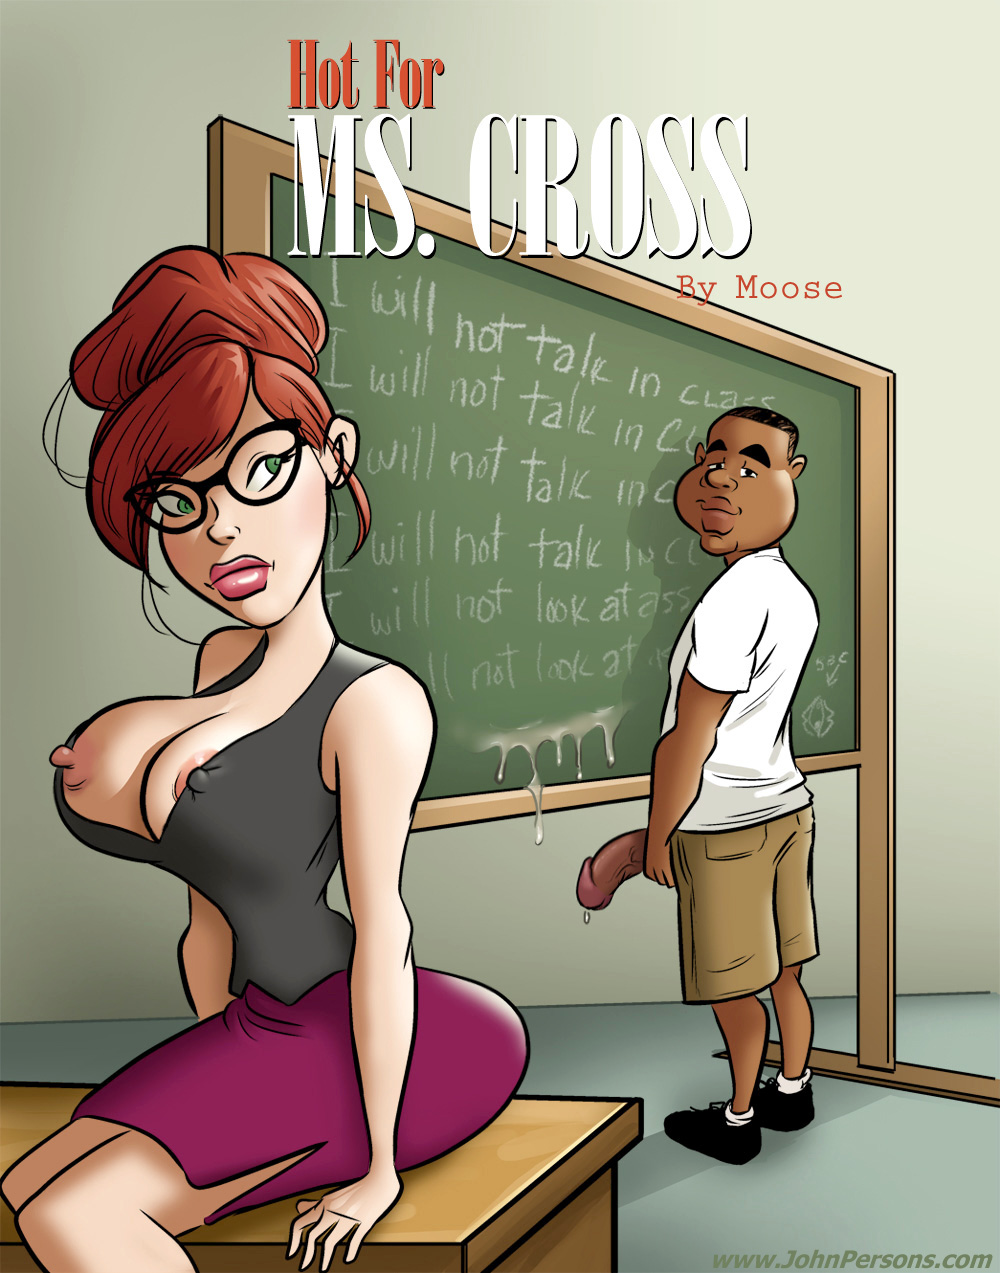 Cartoon Porn John Persons Teachers - John Persons Ms Cross by Moose 33 pages